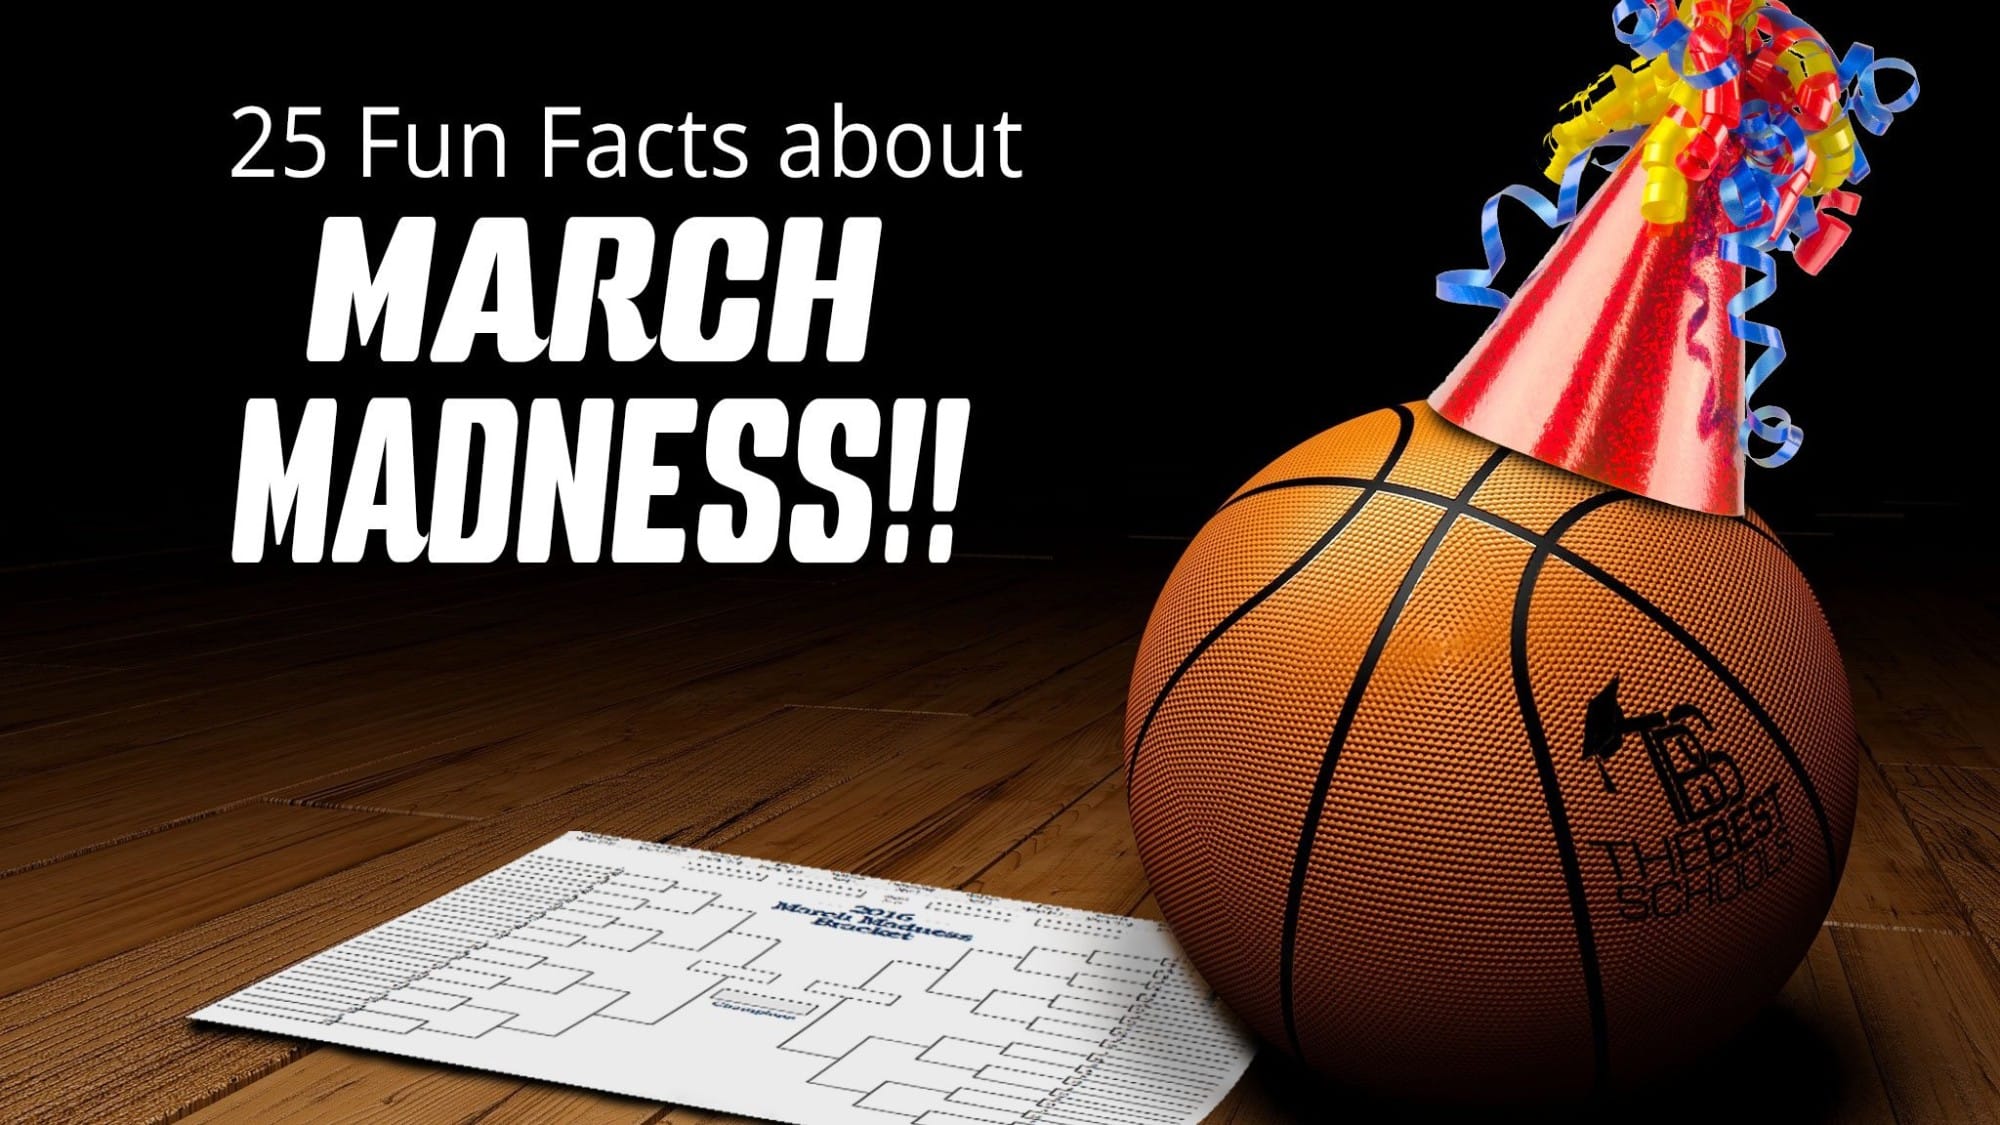 25 Fun Facts About March Madness